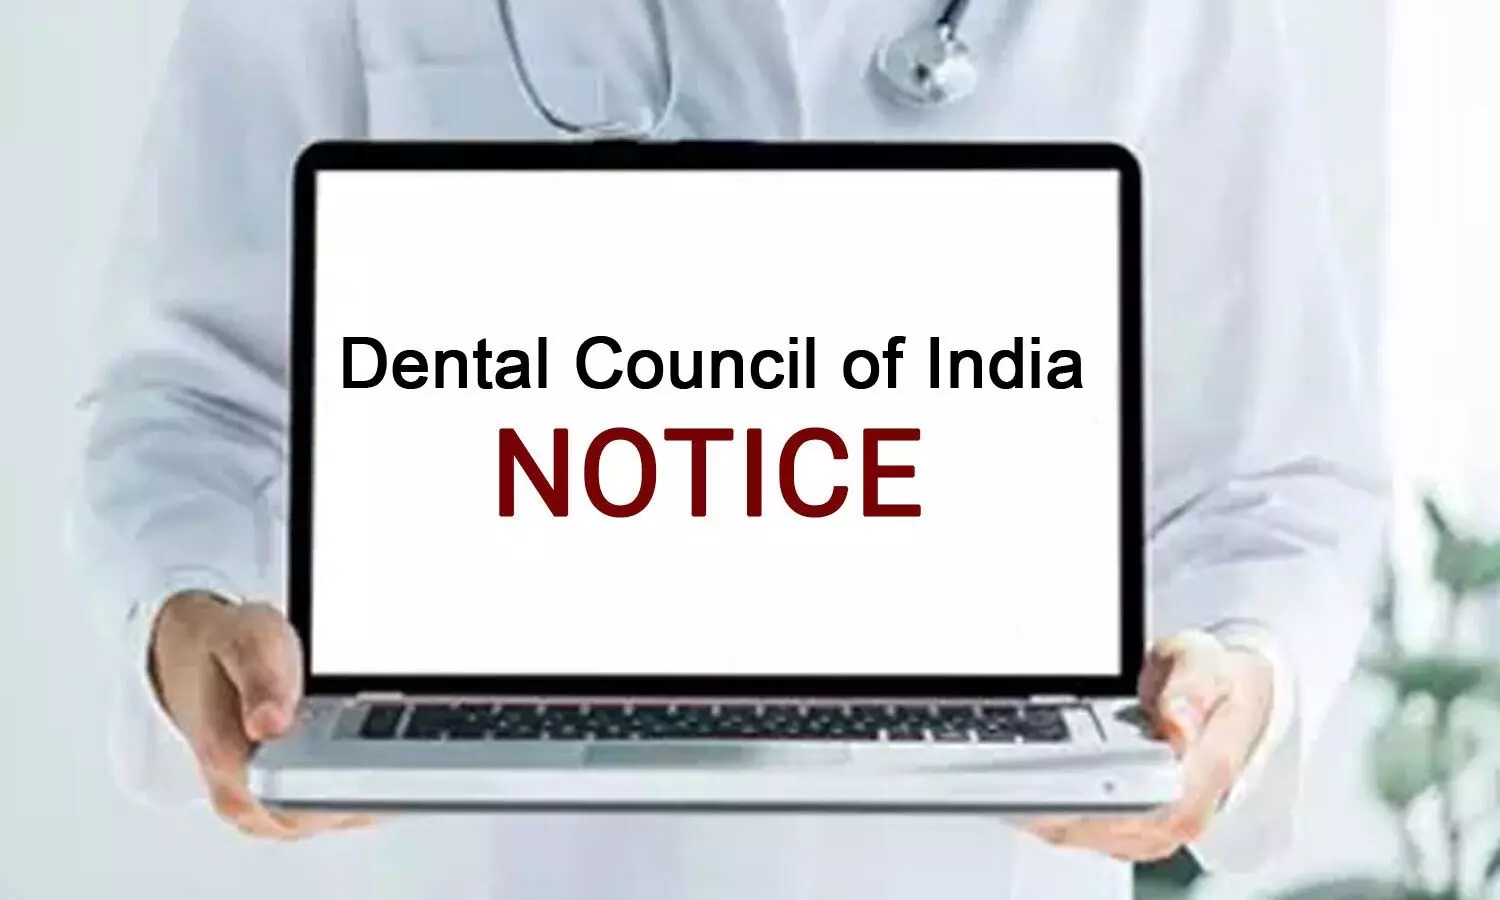 Furnish payment info of teaching, non teaching, other staff: DCI to self-financing dental colleges